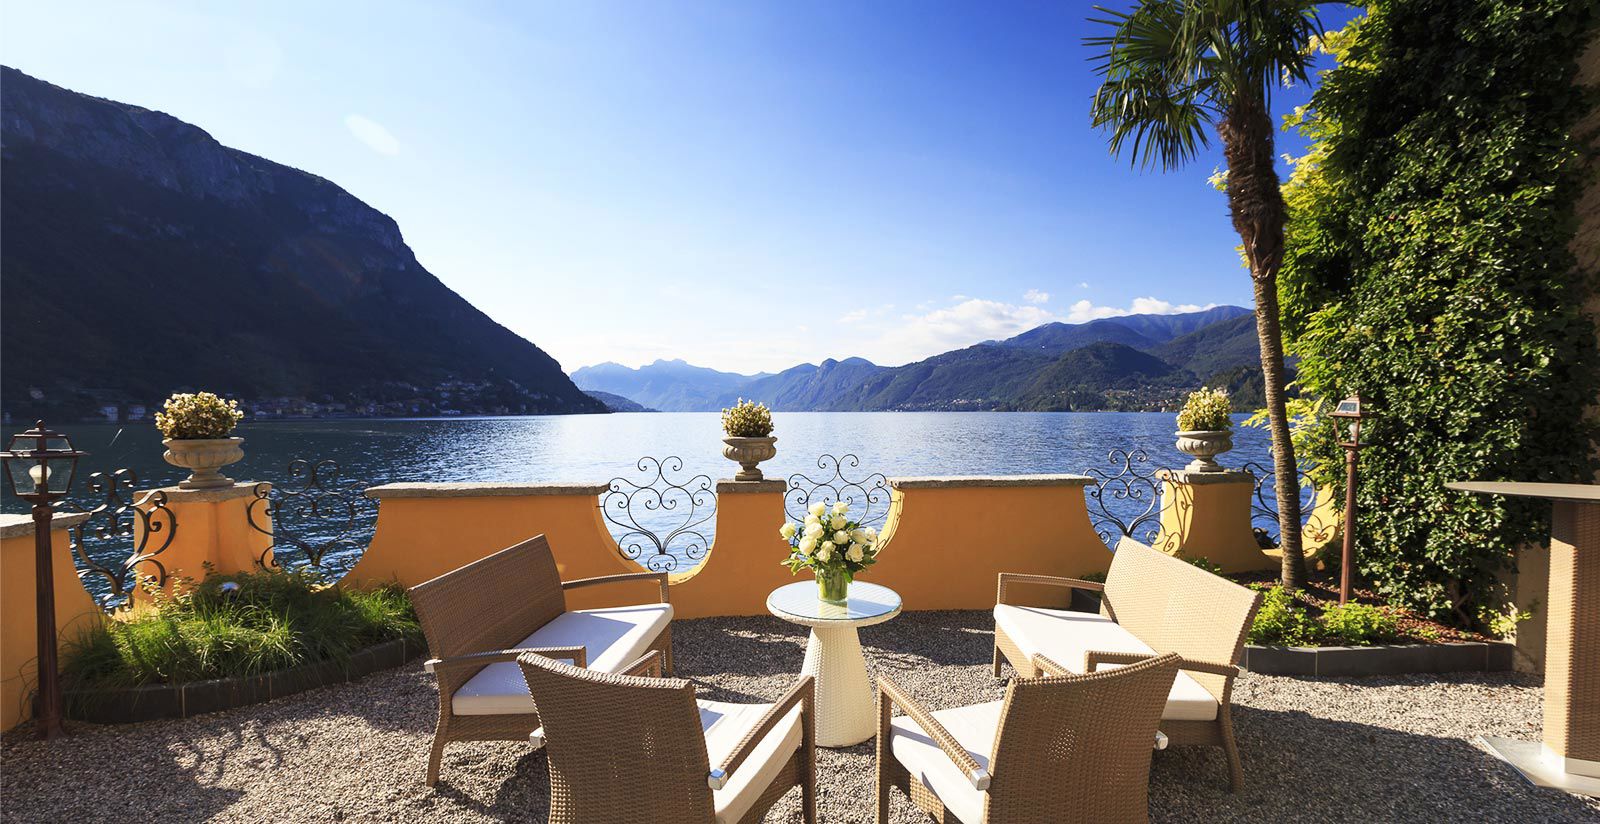 Hotel with a boat rental service on Lake Como 4